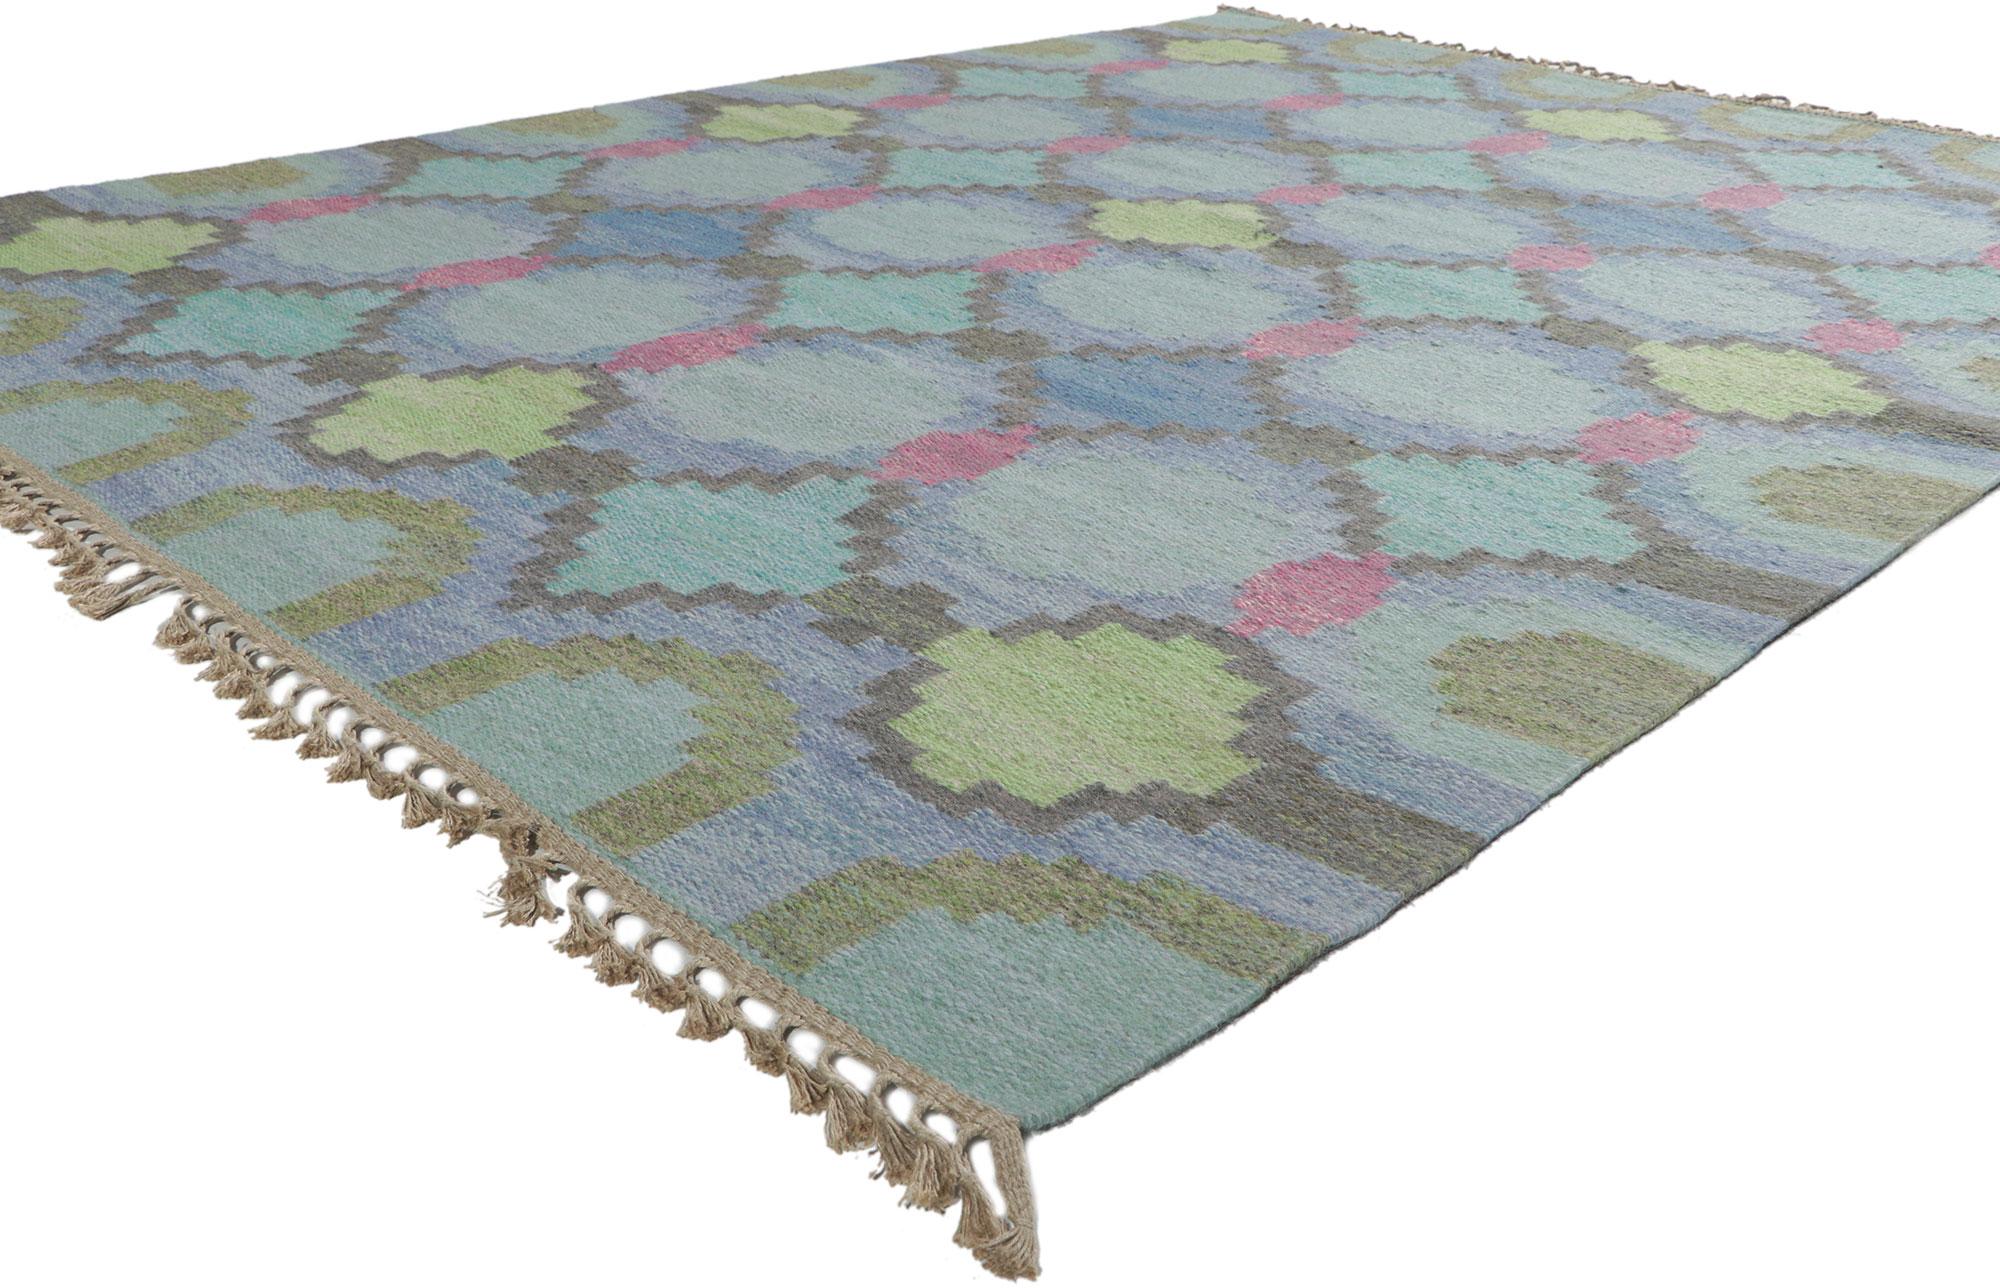 78470 Vintage Swedish Kilim Rollakan Rug by Judith Johansson, 06'03 x 08'03. With its Scandinavian Modern style, incredible detail and texture, this handwoven wool vintage Swedish rollakan rug is a captivating vision of woven beauty. The